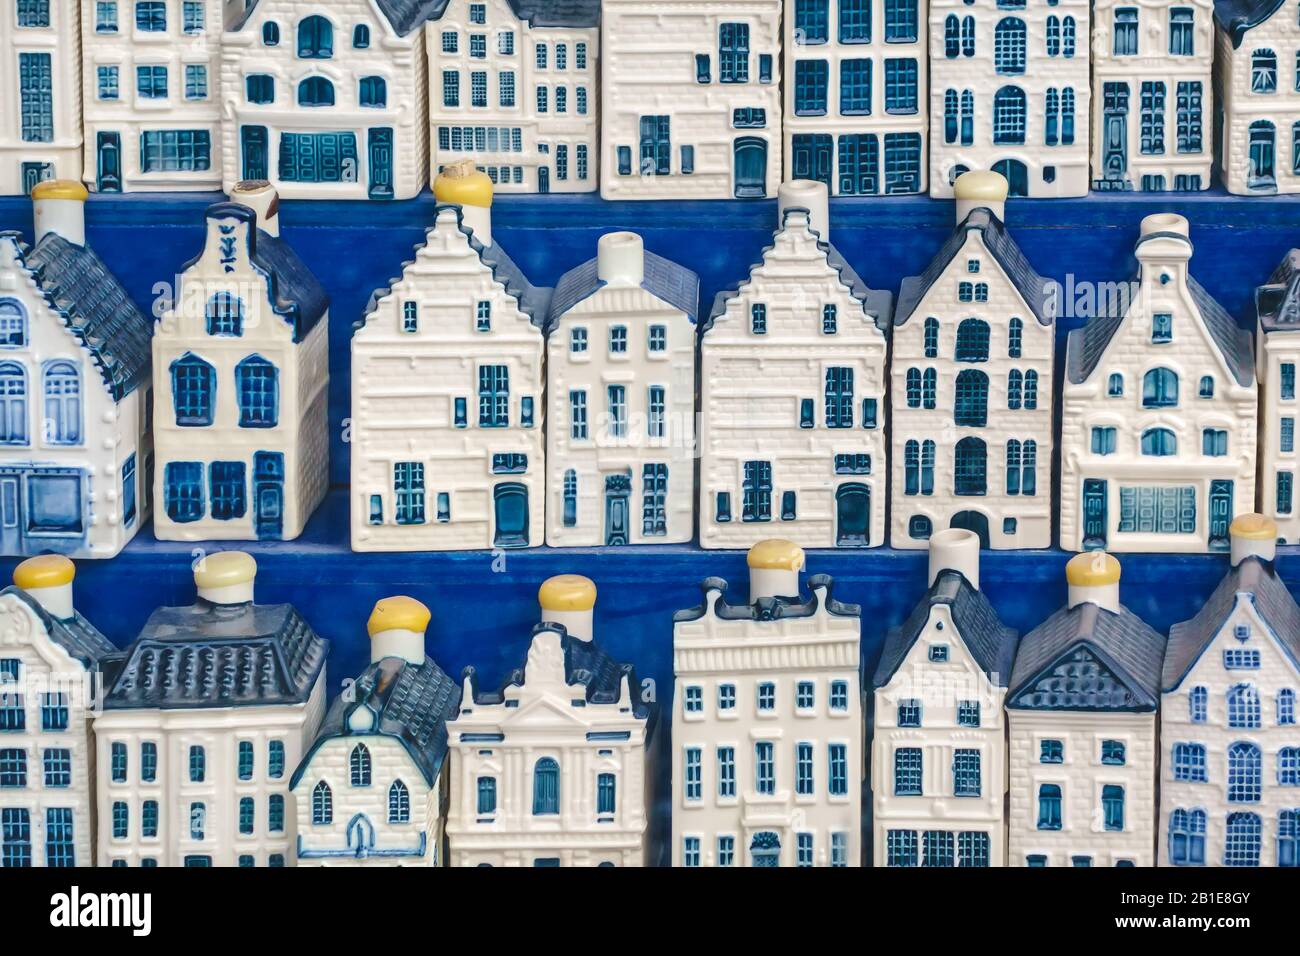 Rows of blue miniature porcelain Amsterdam canal houses Stock Photo